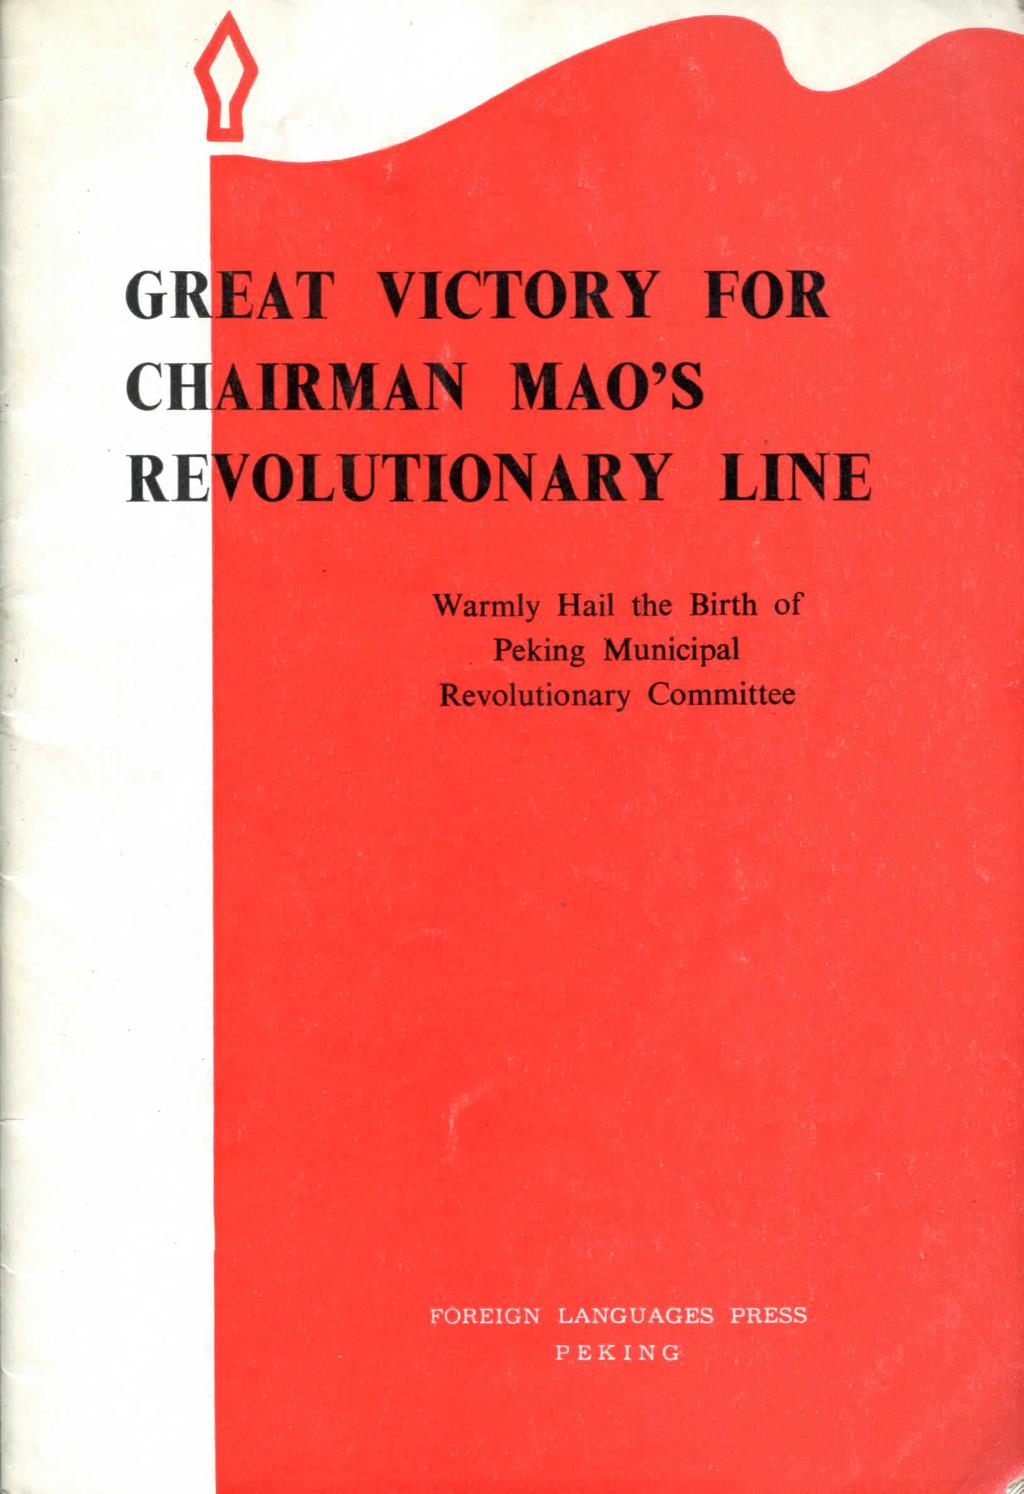 GREAT VICTORY FOR CHAIRMAN MAO'S REVOLUTIONARY LINE Warmly Hail the Birth